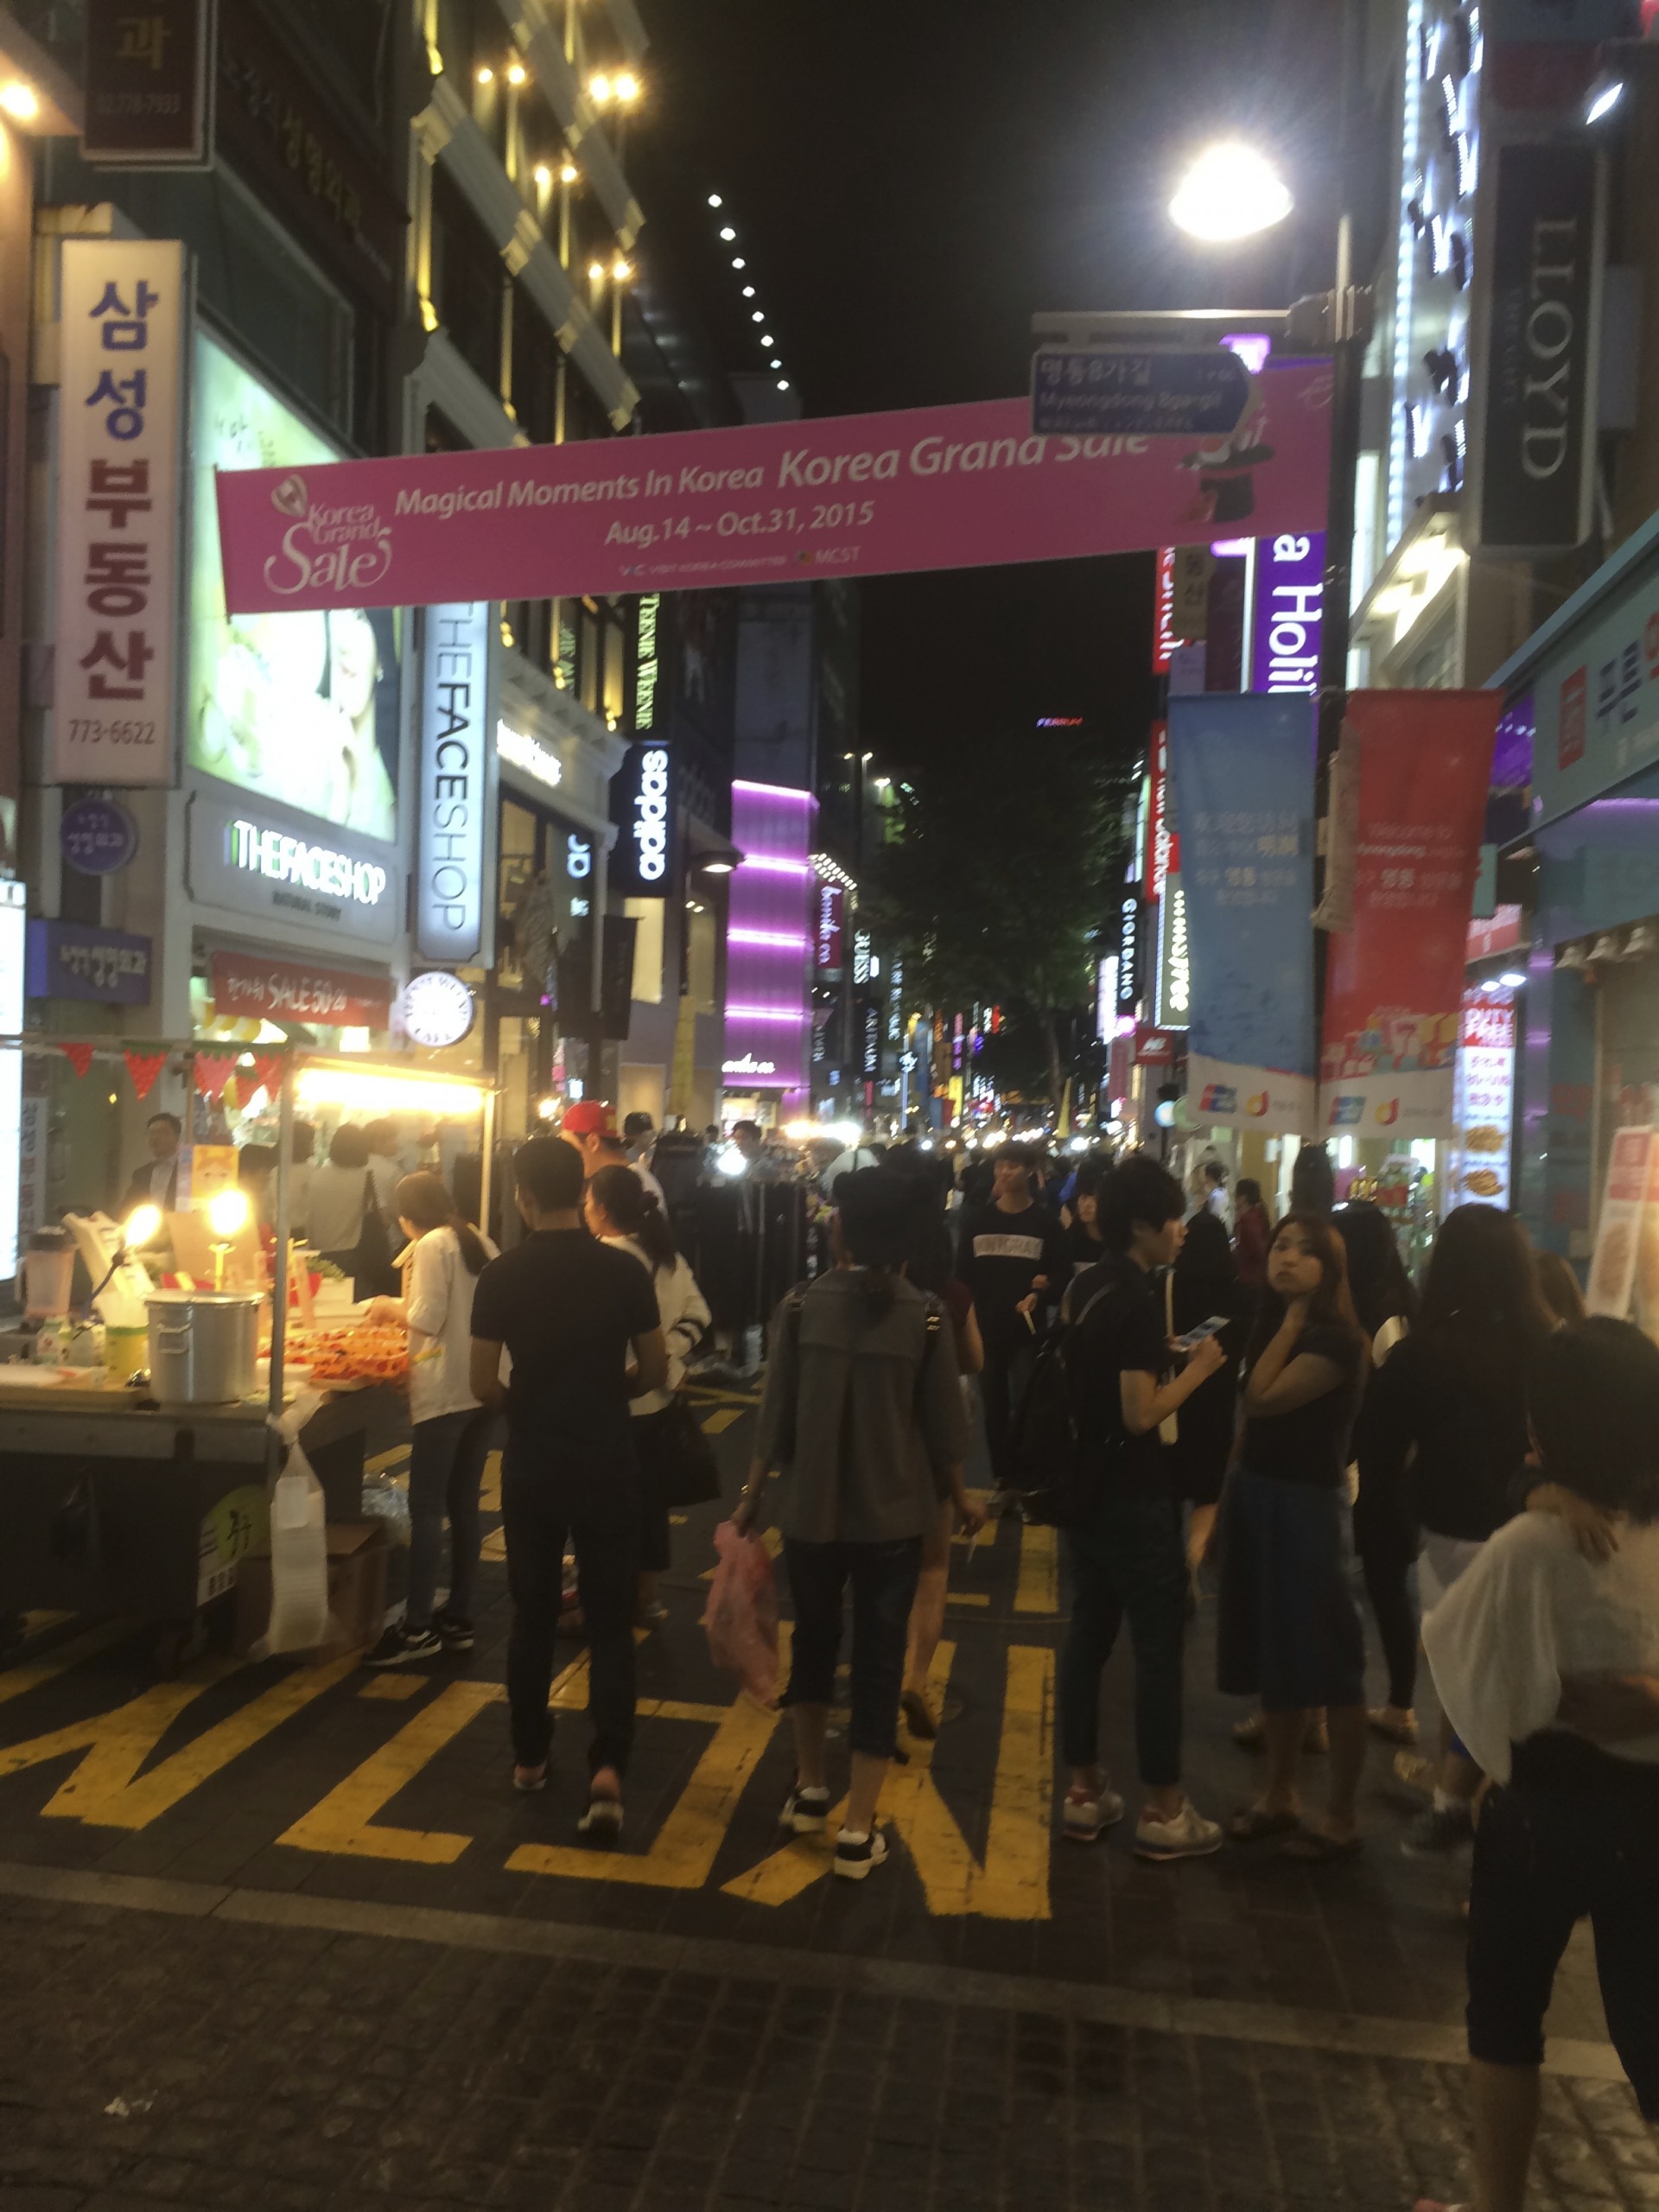 A typical street in Myeongdong at night